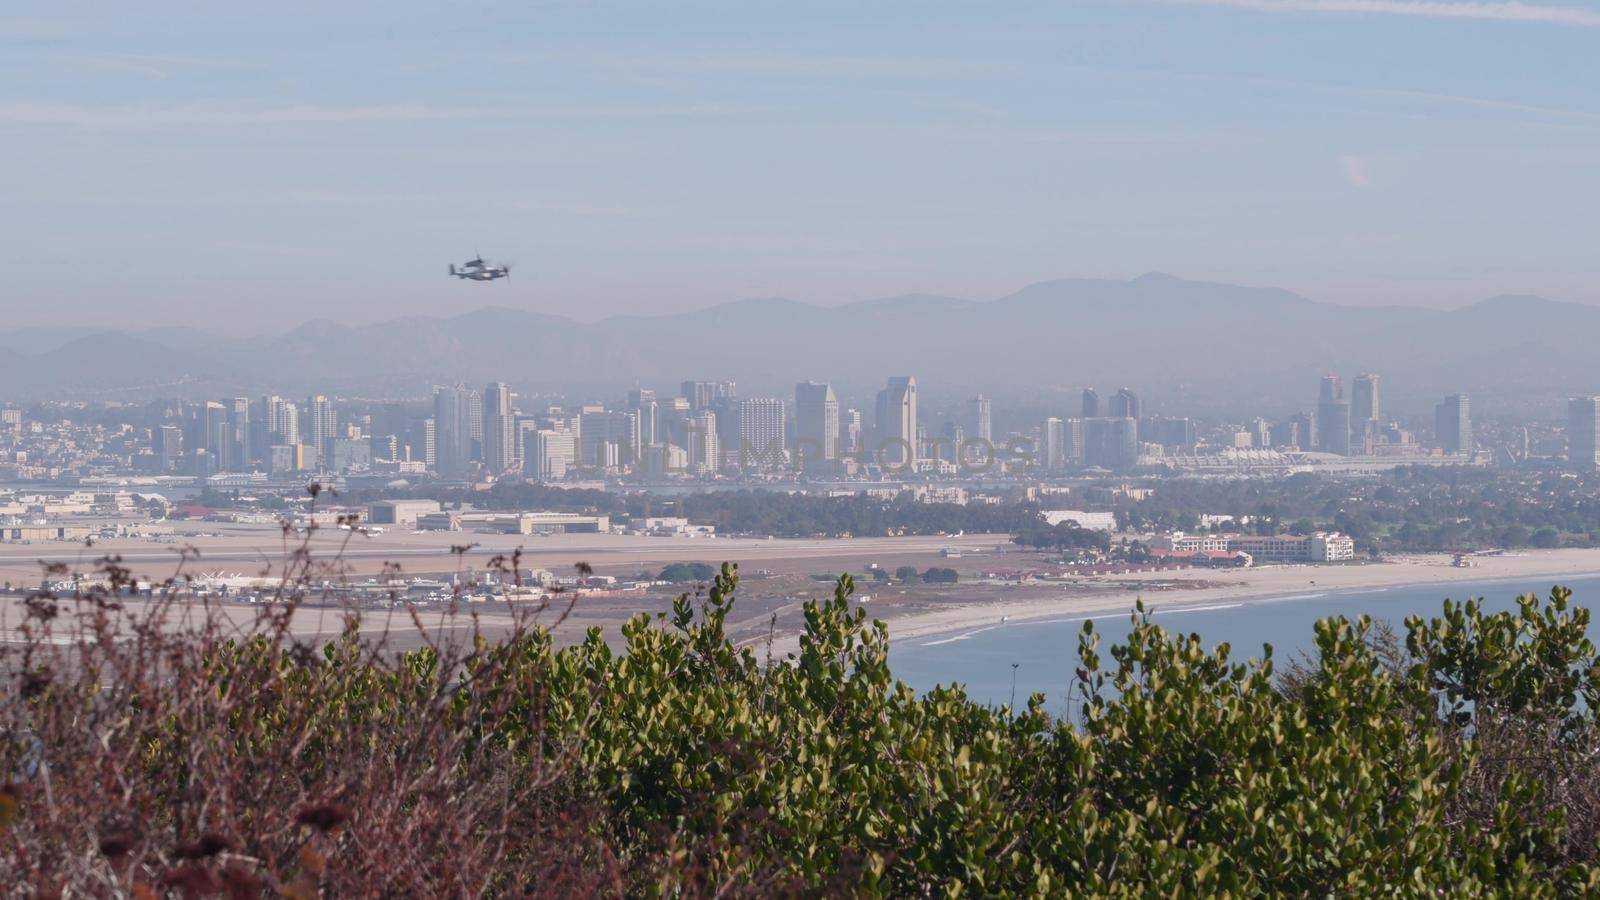 San Diego city skyline, cityscape of downtown with highrise skyscrapers, California coast, USA. View of Coronado island from above, Point Loma vista viewpoint. Helicopter flying mid air in sky.